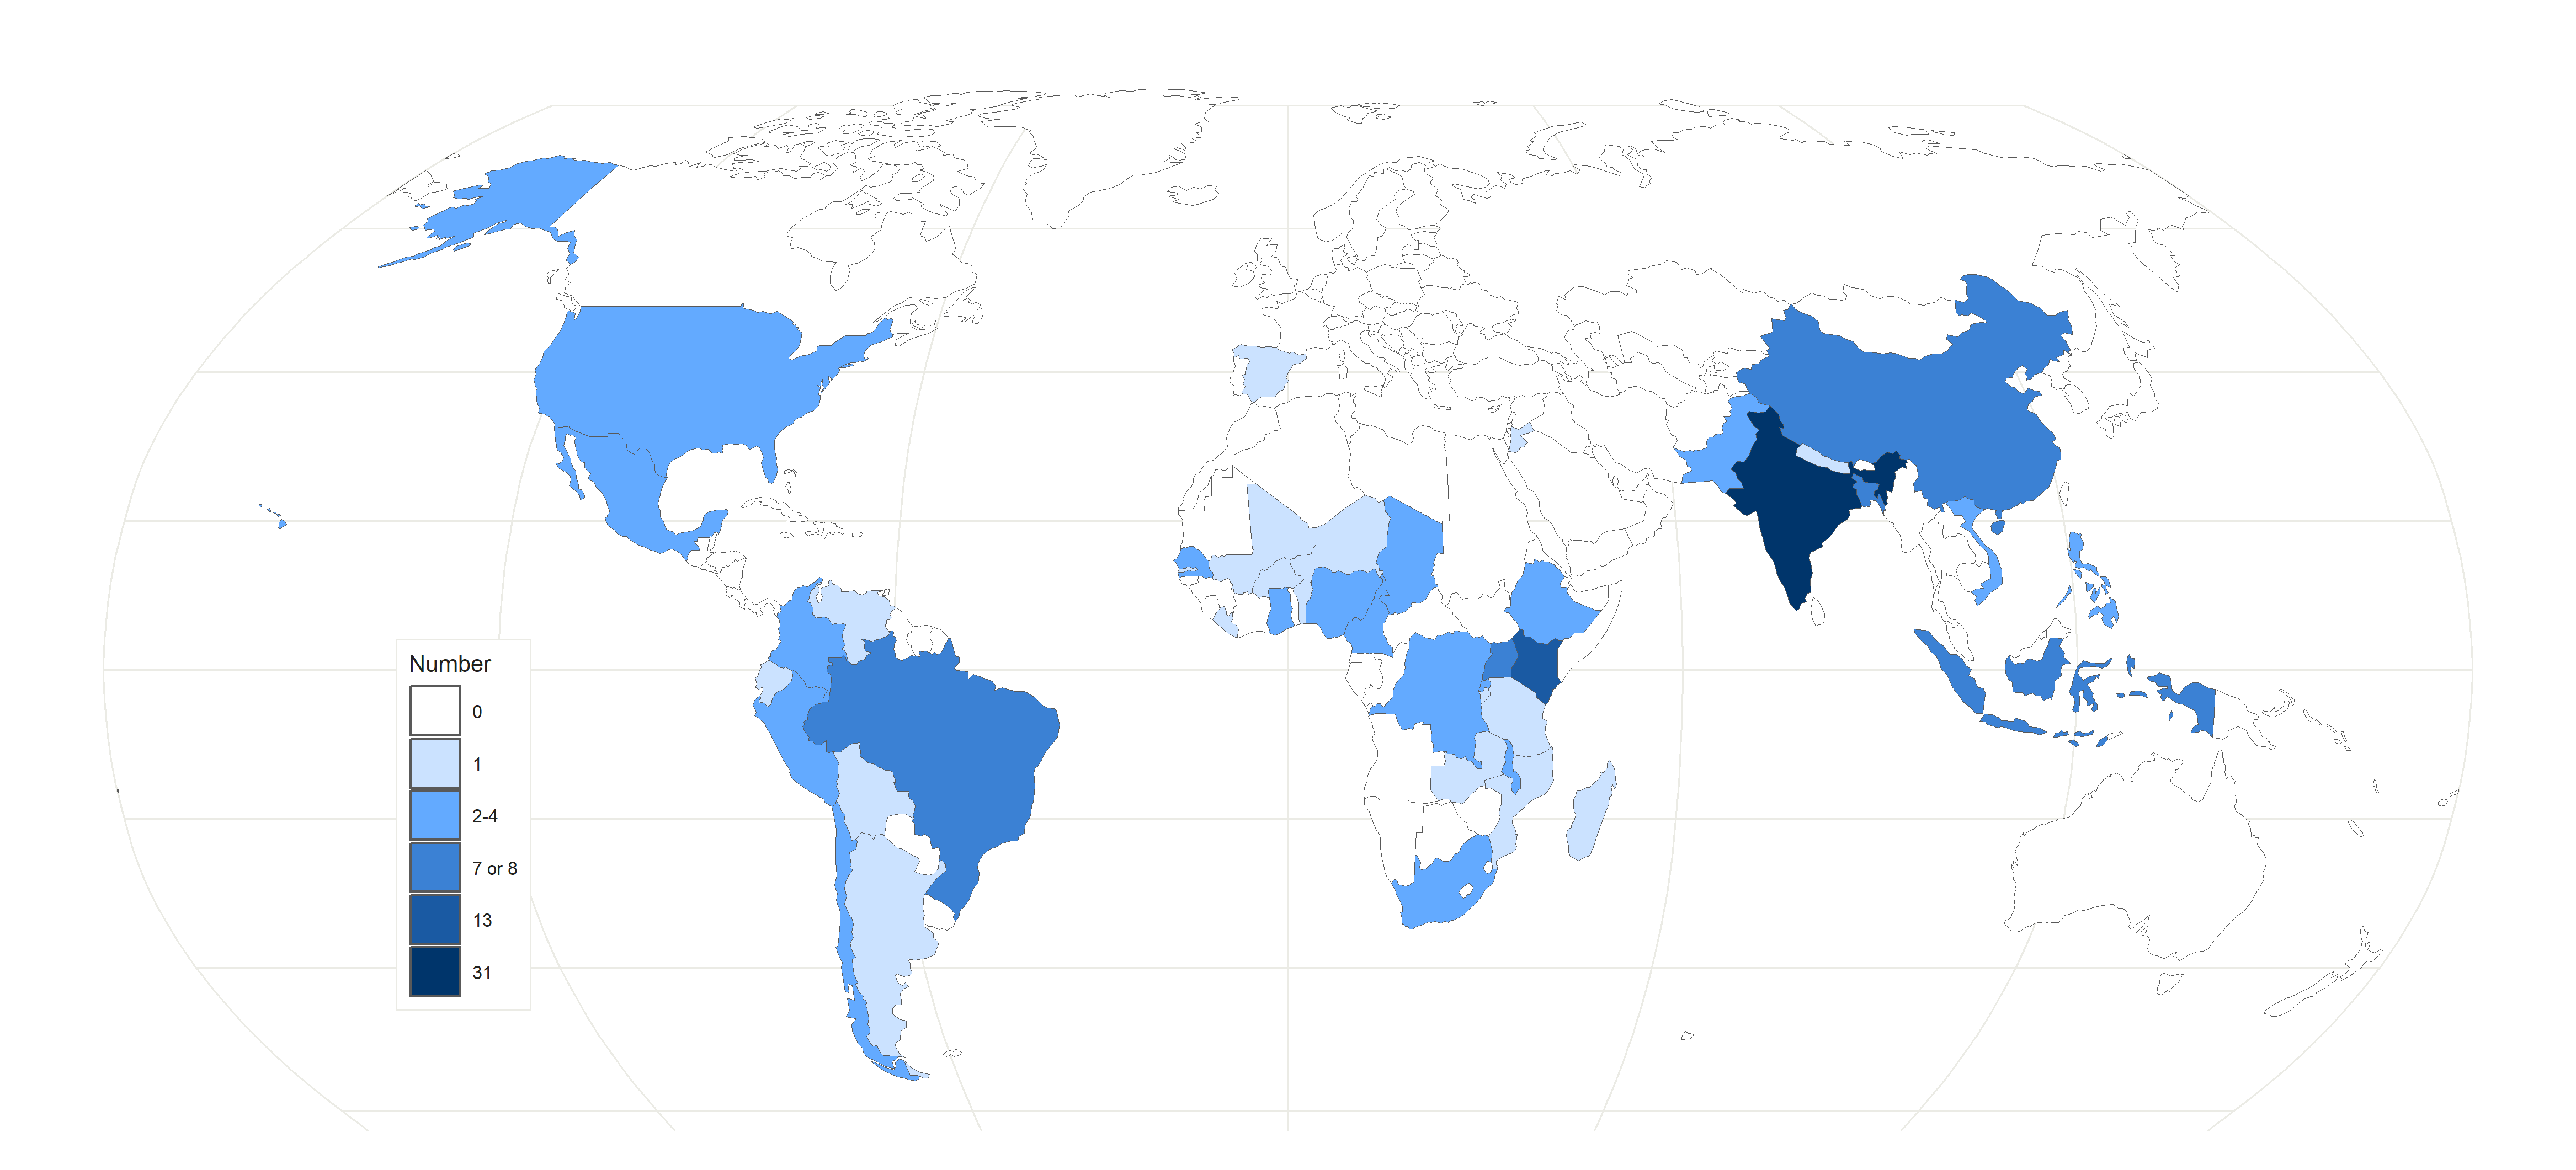 "Countries Studied in Papers Presented at NEUDC 2022"